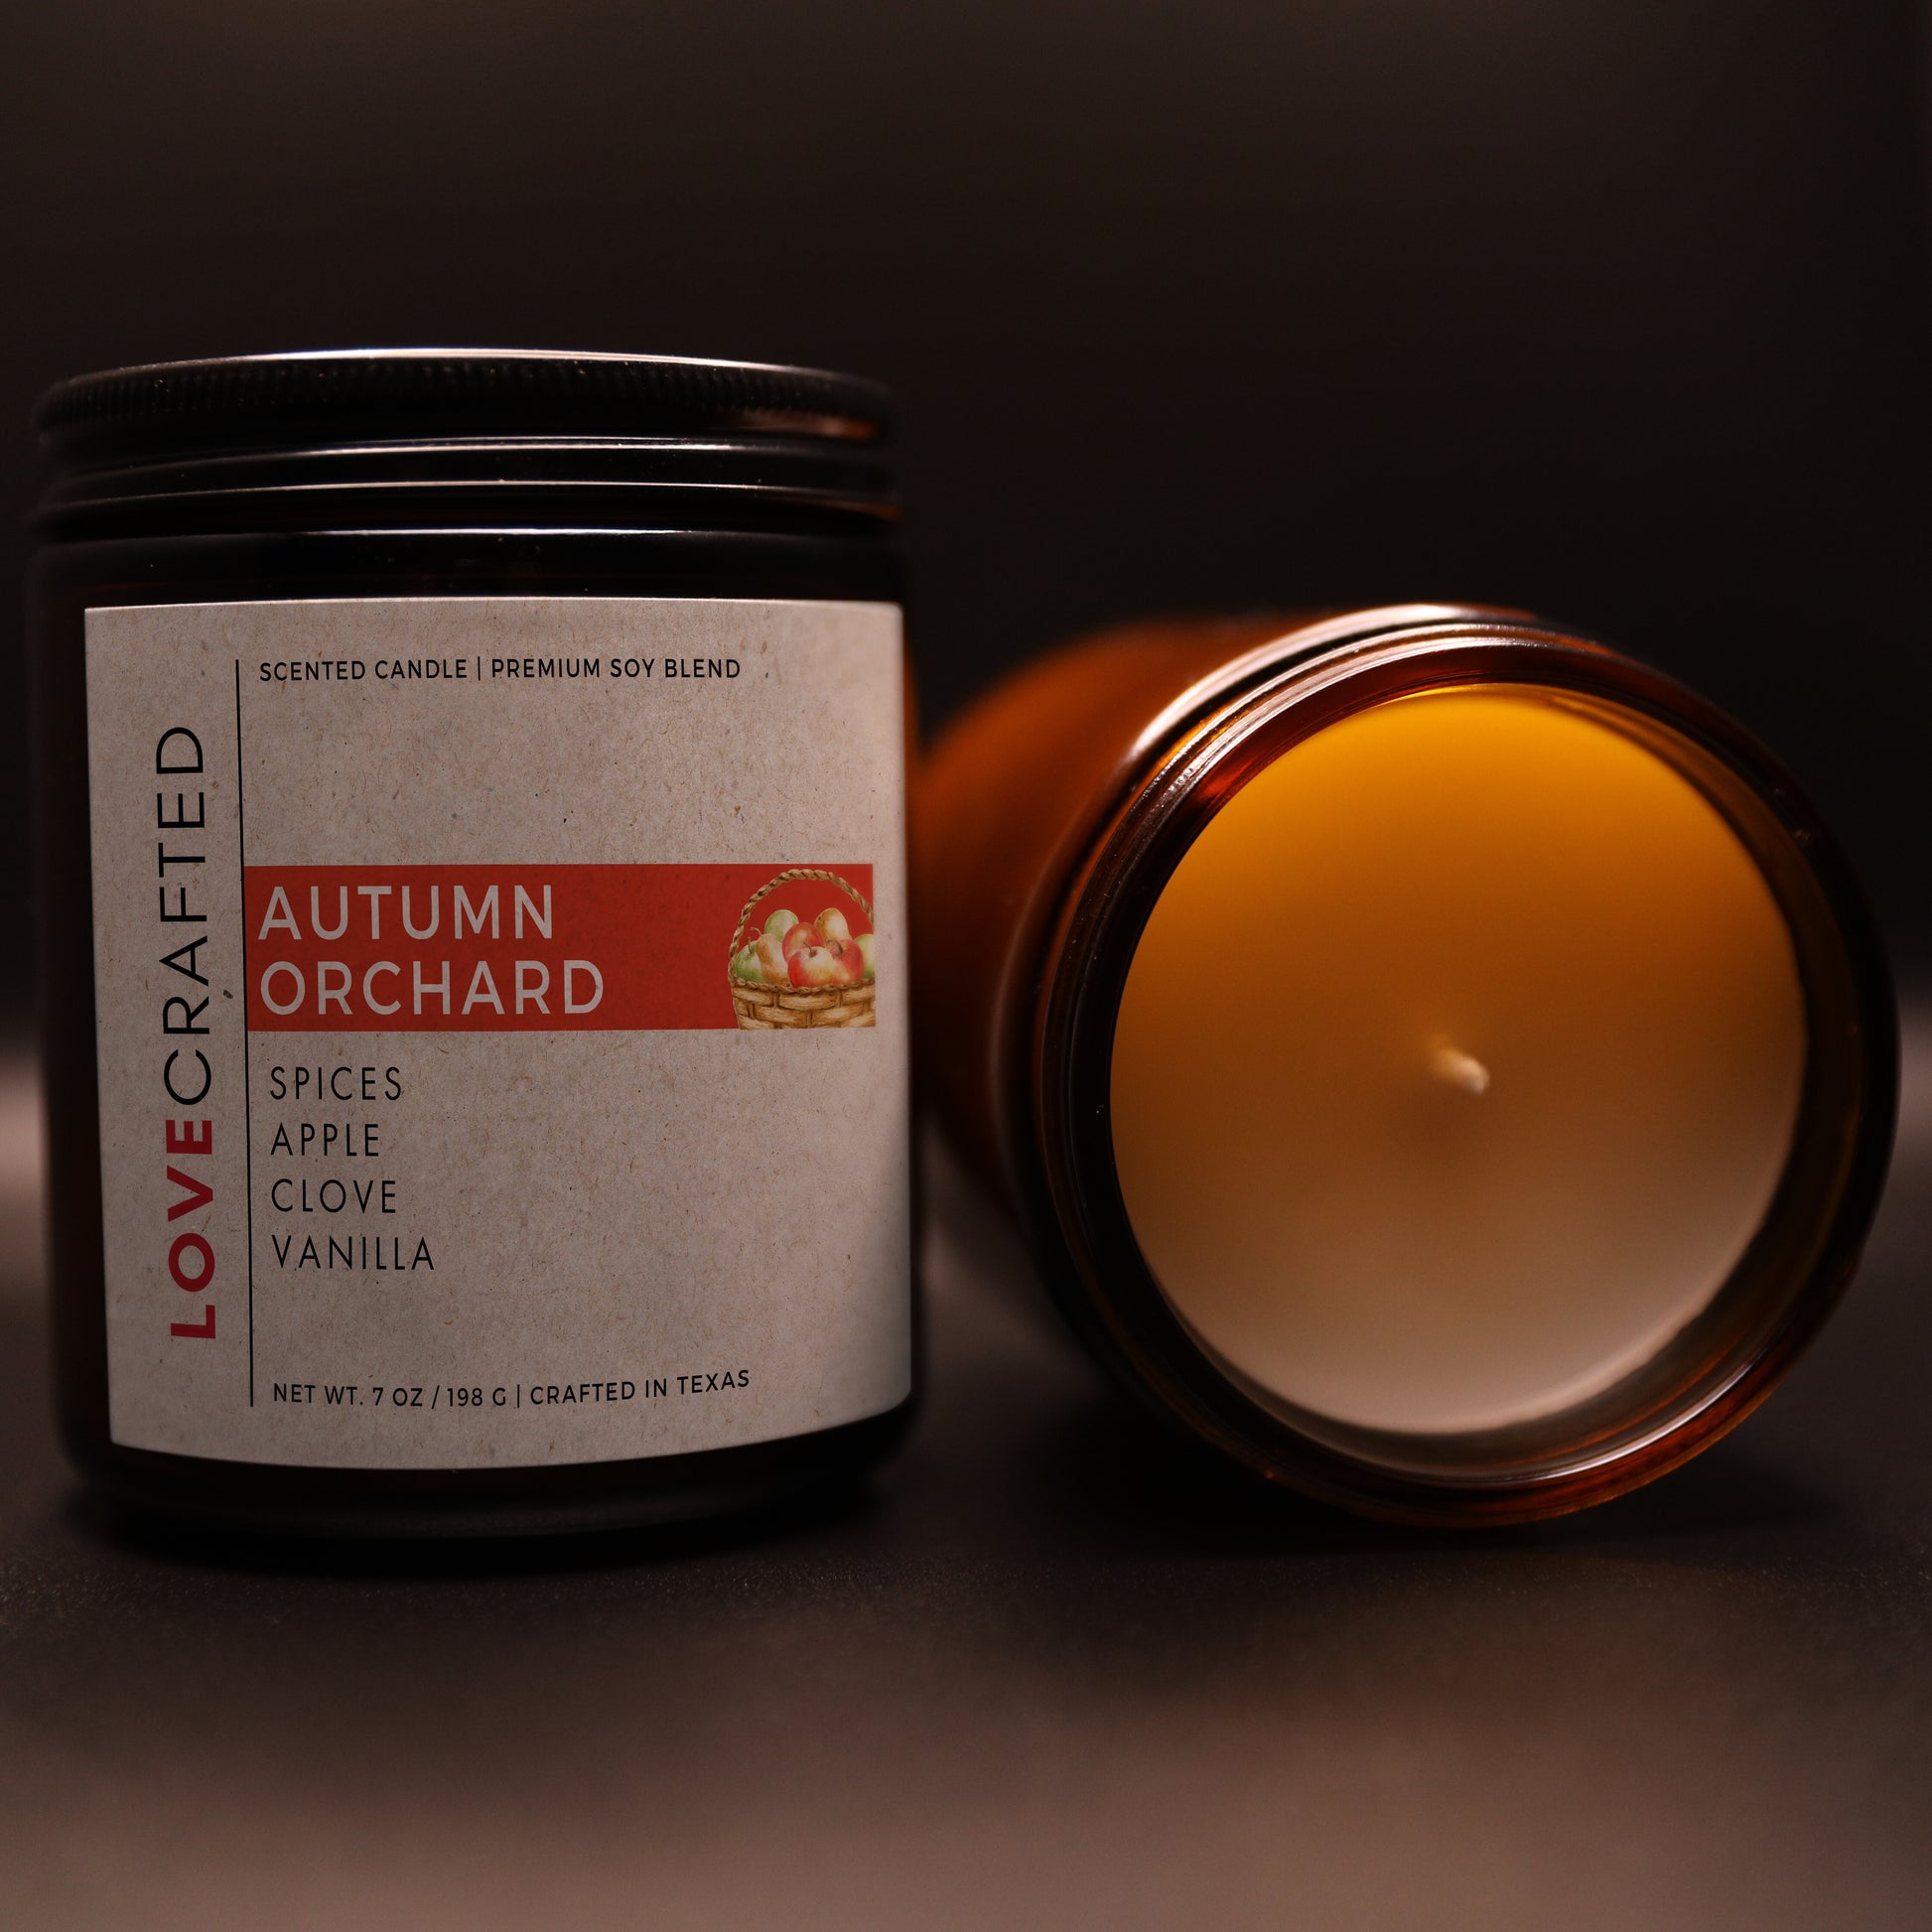 Autumn Orchard, a Fruity Food and Drink Lovecrafted Candle